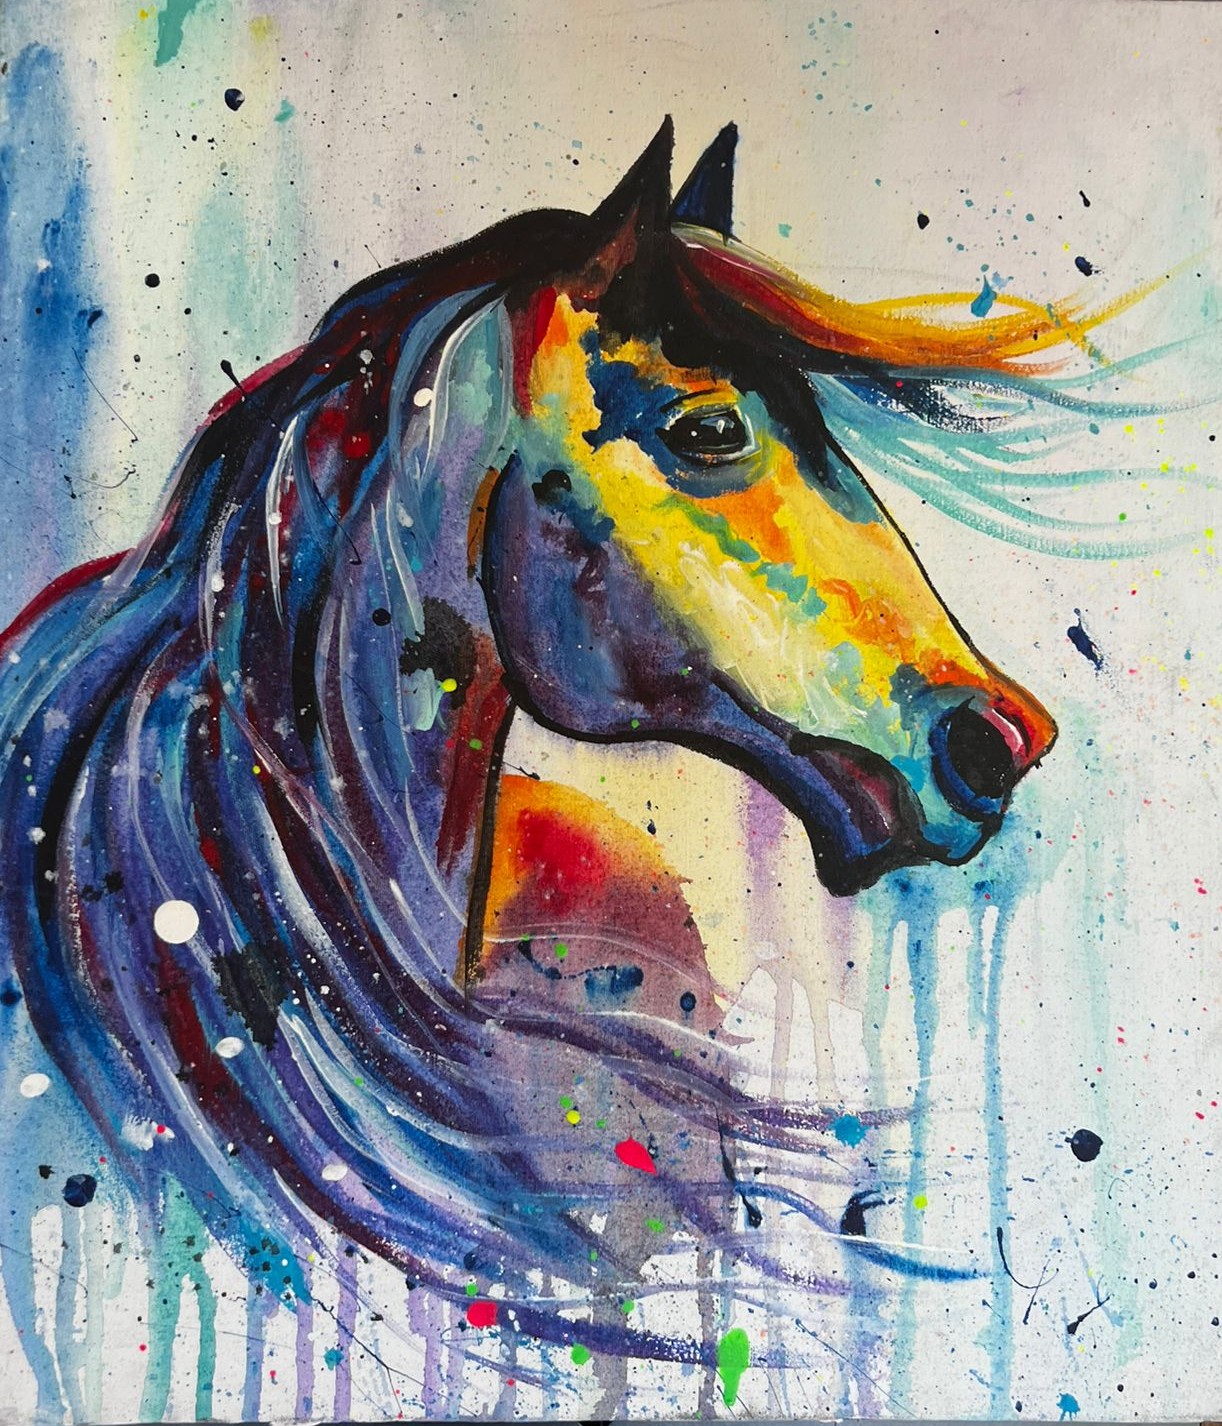 A Colorful Horse experience project by Yaymaker